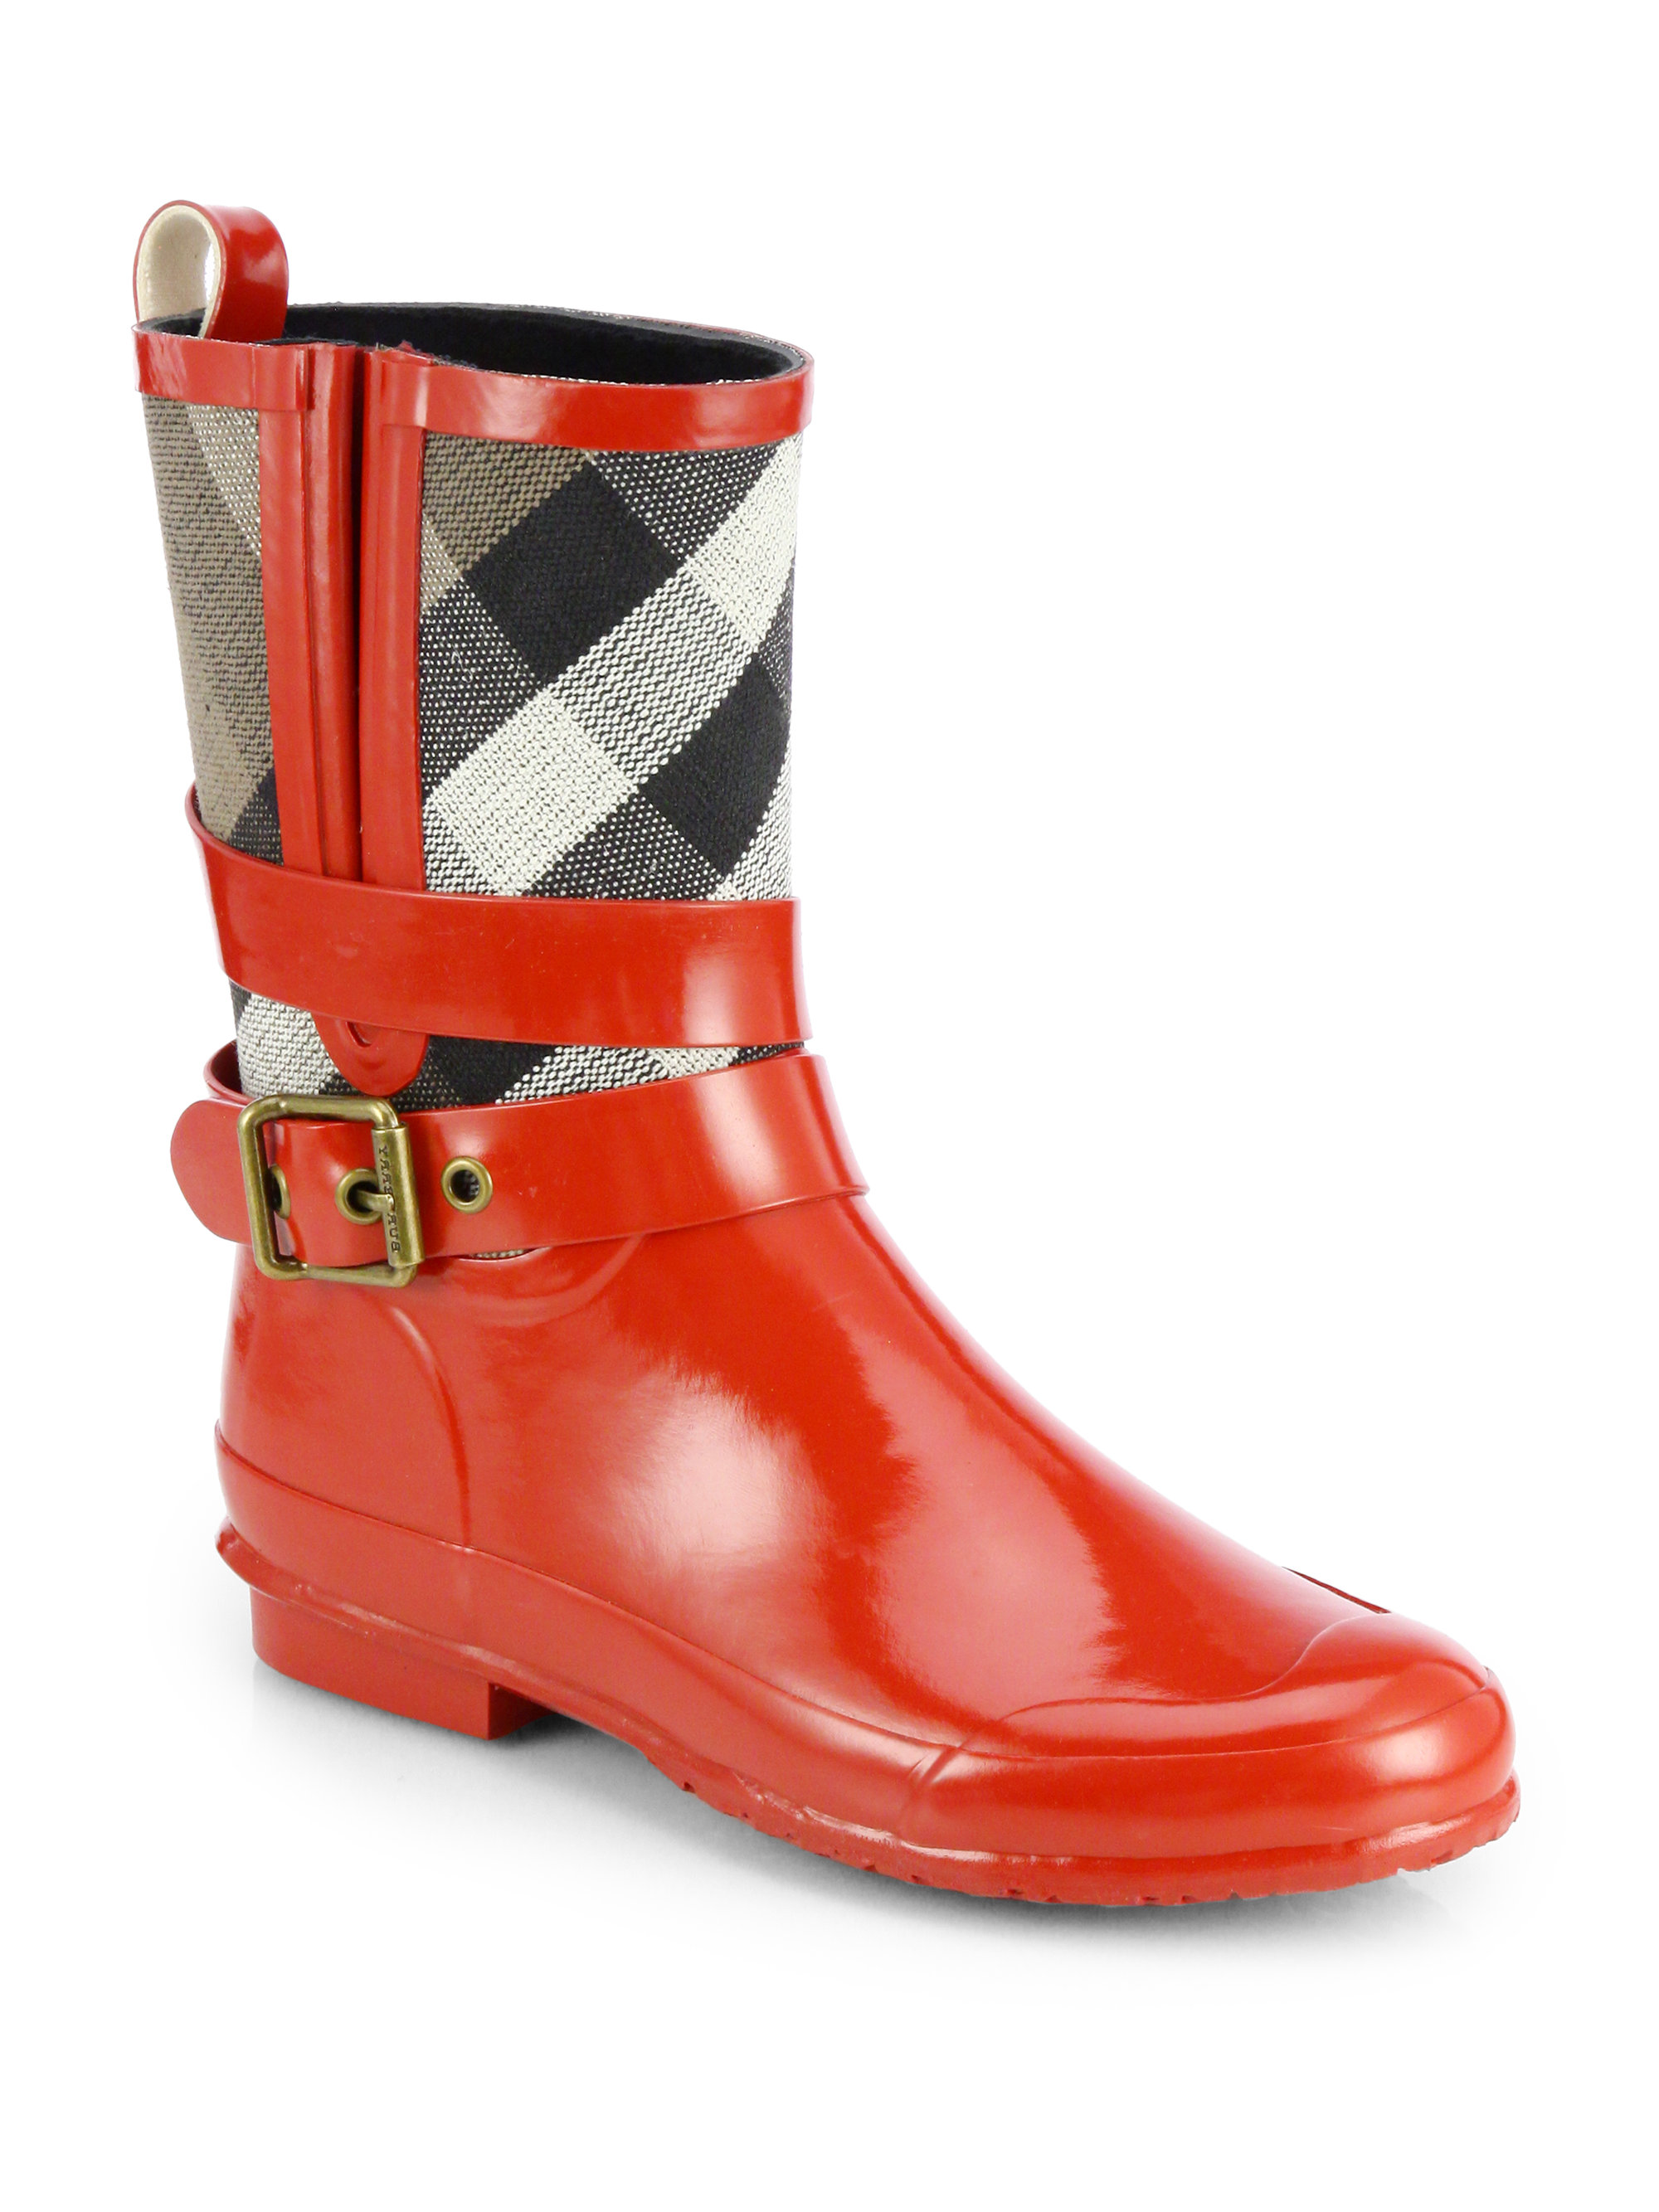 Burberry Halloway Check Rain Boots in Red (BRIGHT MILITARY) | Lyst